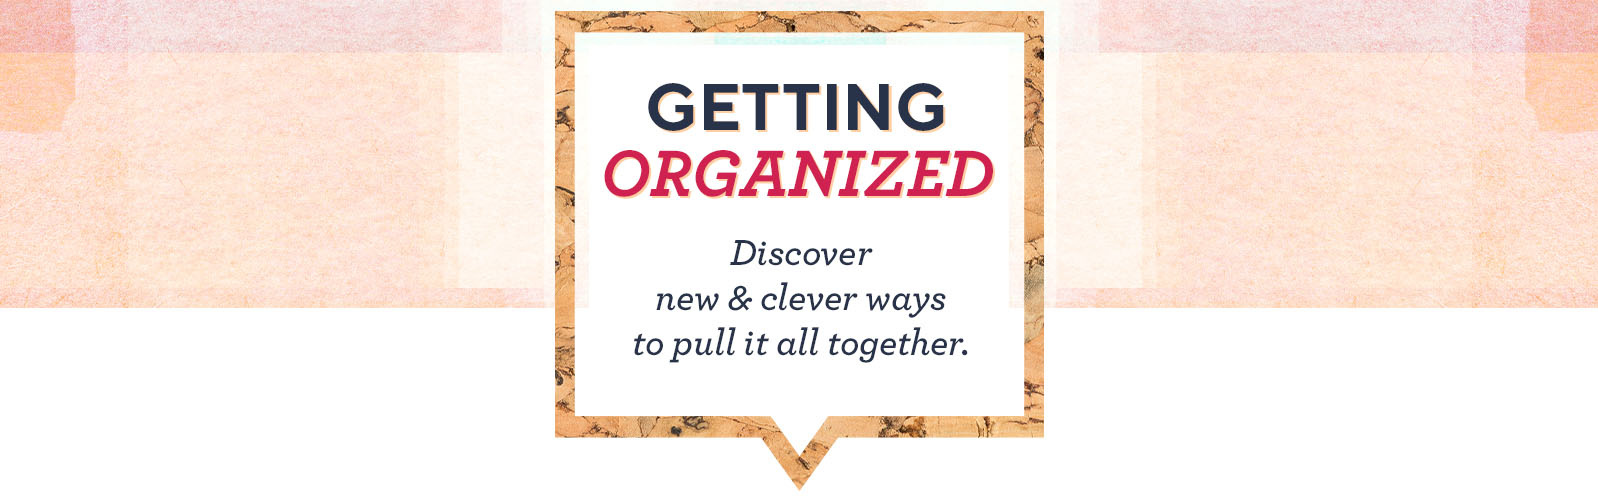 Getting Organized  Discover new & clever ways to pull it all together.